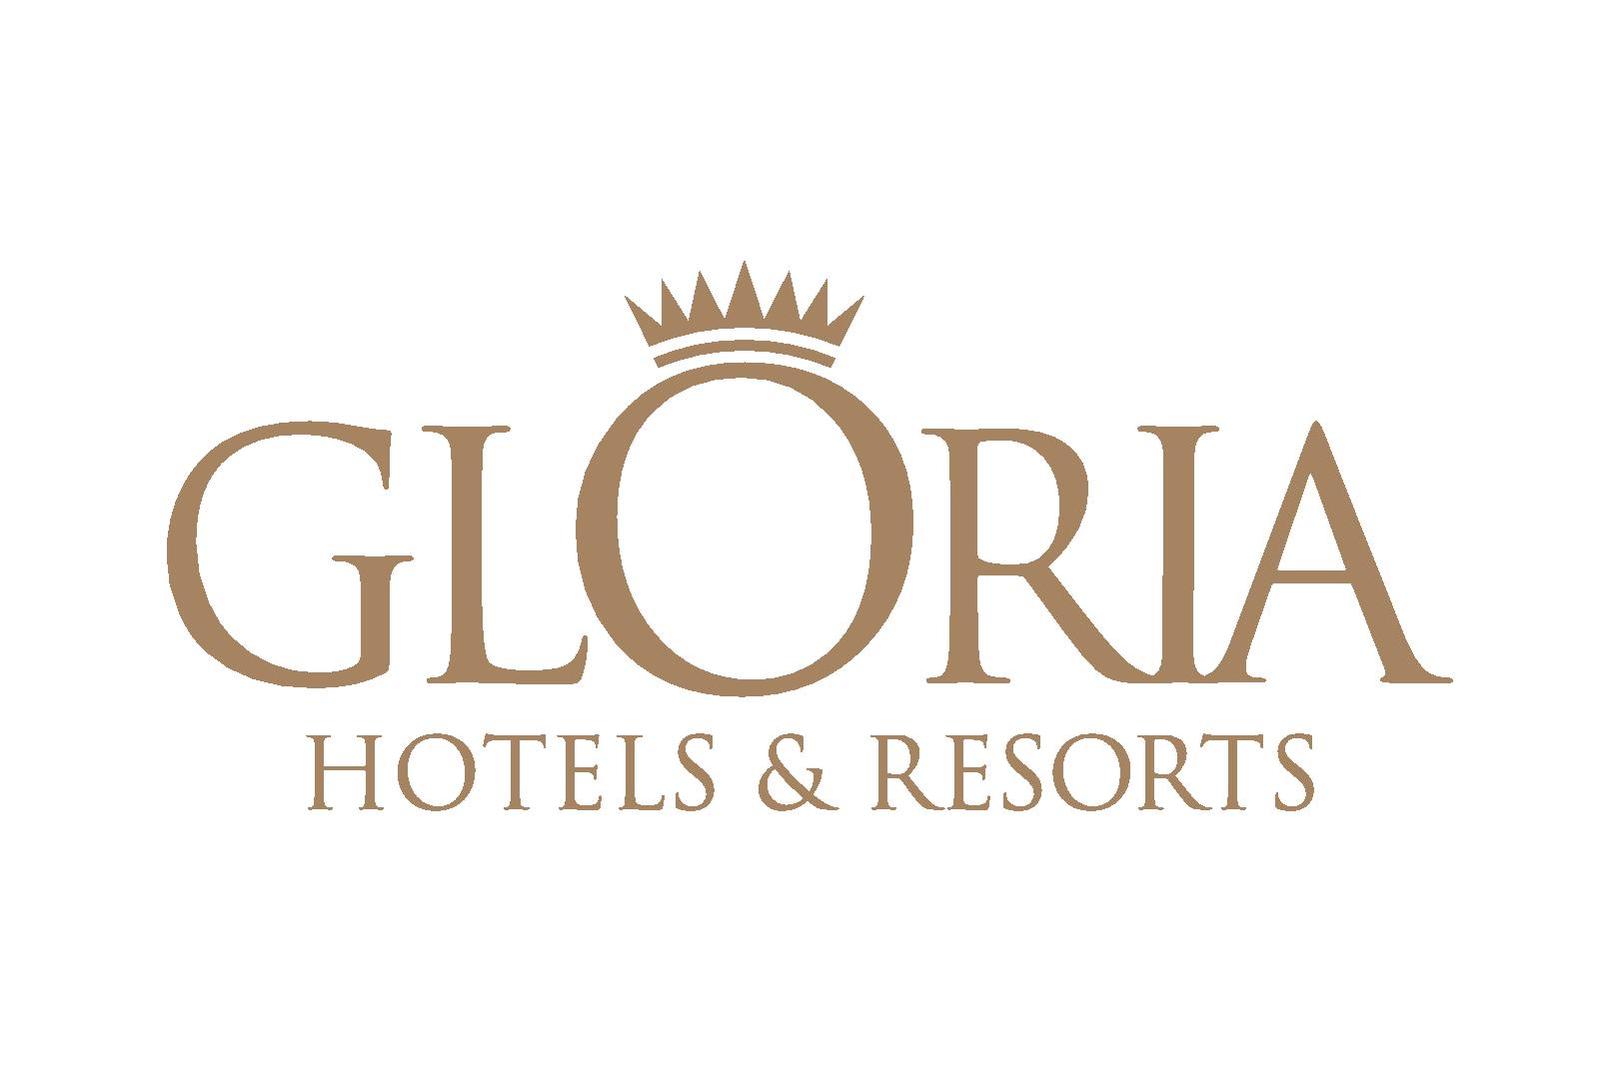 New website for hotel group